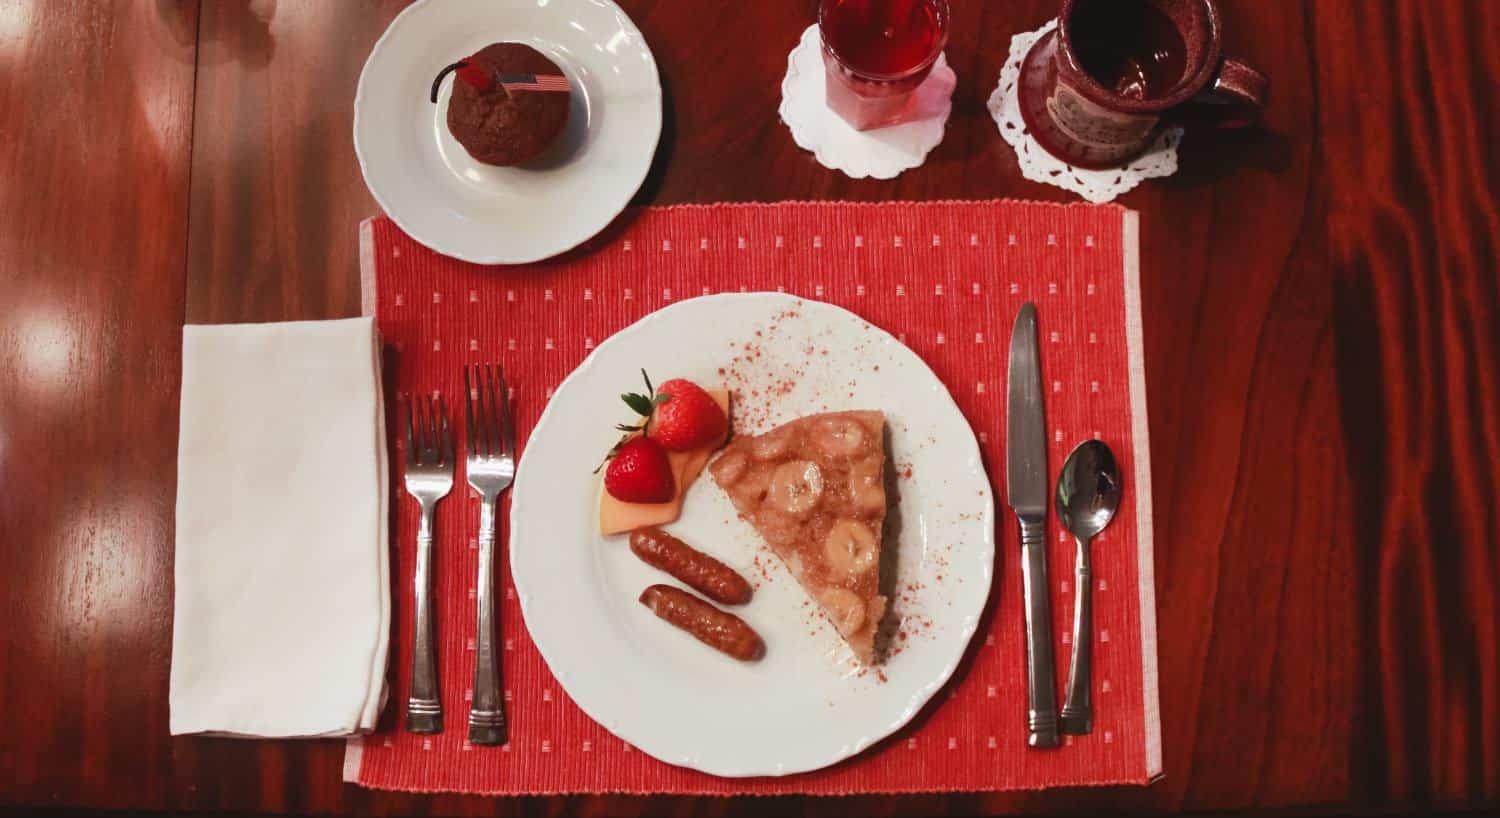 Red placemat and white napkin on wooden table with breakfast food on a white porcelain plate